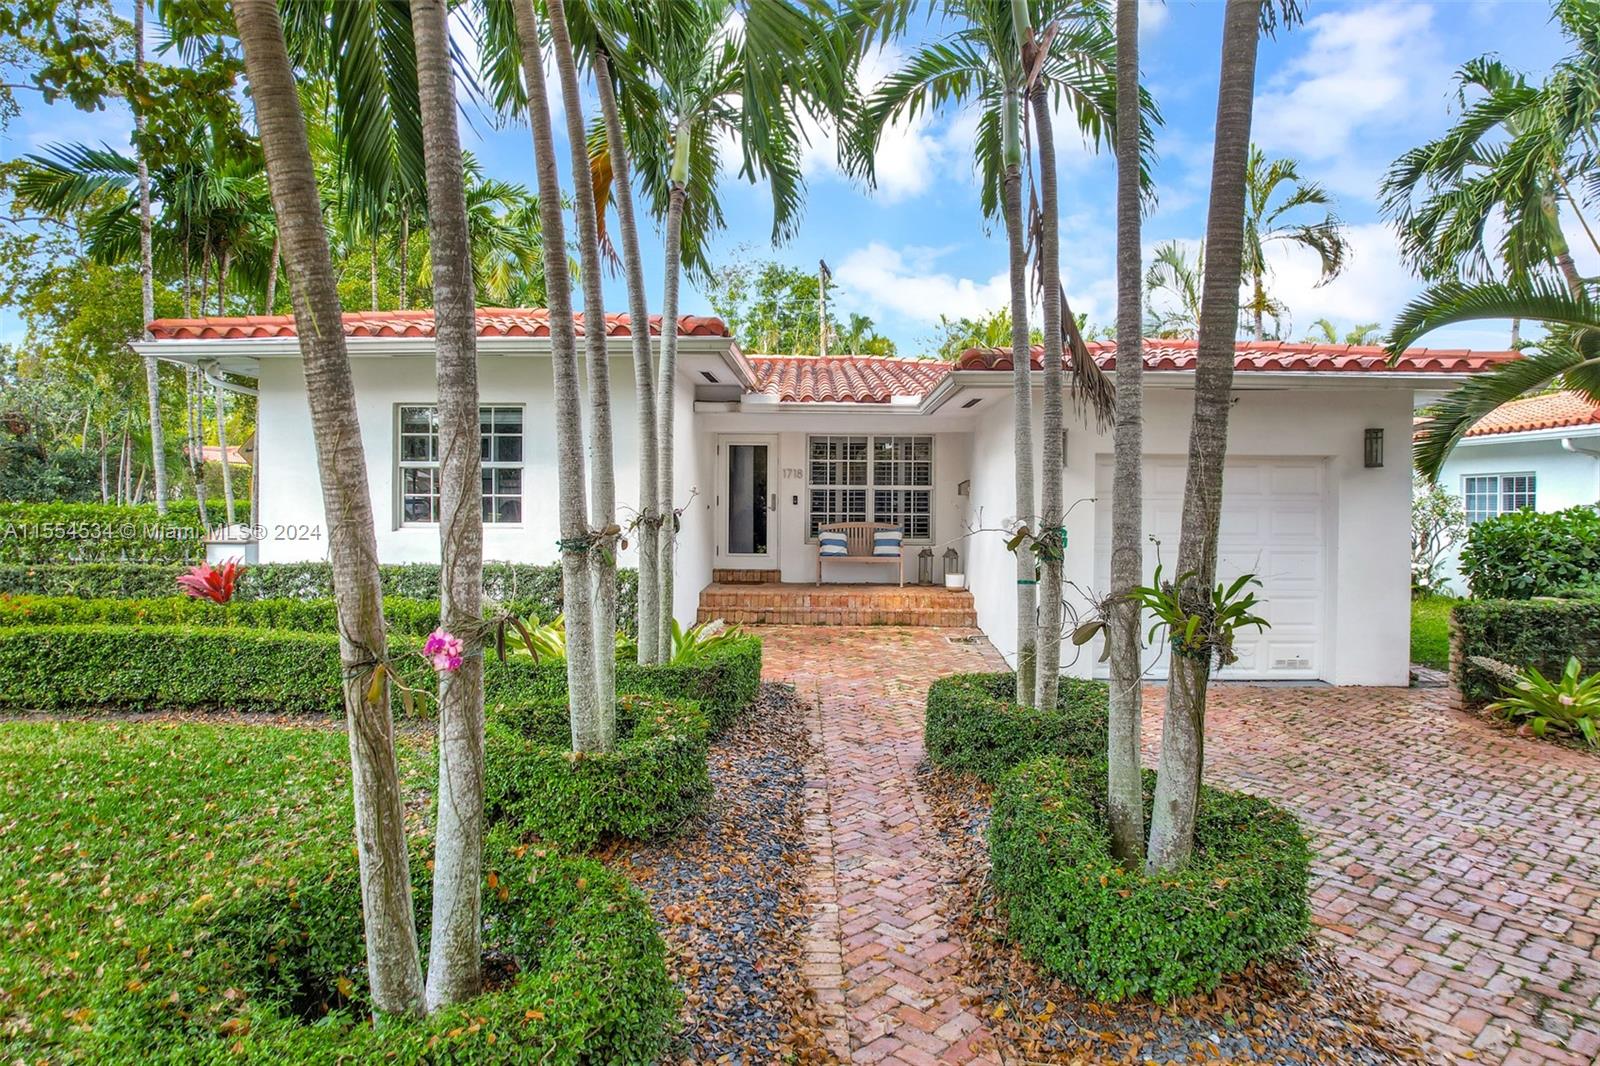 Traditional Coral Gables updated home on a corner lot.A perfect combination of Mid-century elements and Today’s comforts.Big windows bring tons of natural light.Spacious living areas with flexible layout. Comfortable kitchen has modern light gray floor to ceiling cabinets and full backsplash, white quartz ctop, built-in pantry & GE Monogram S/S appl. Majestic Master Bedroom w/spectacular Closet, French doors overlooking backyard with paved patio and playset. Pretty new roof, brand new AC, impact windows and doors, plantation shutters, window treatments, travertine stone wood floors, LED recessed lighting, custom closets. Walking distance from Granada Golf, CG Country Club (w/cafe, swimming & tennis). Venetian Pool & Miracle Mile with all the dining and entertainment at your disposal.